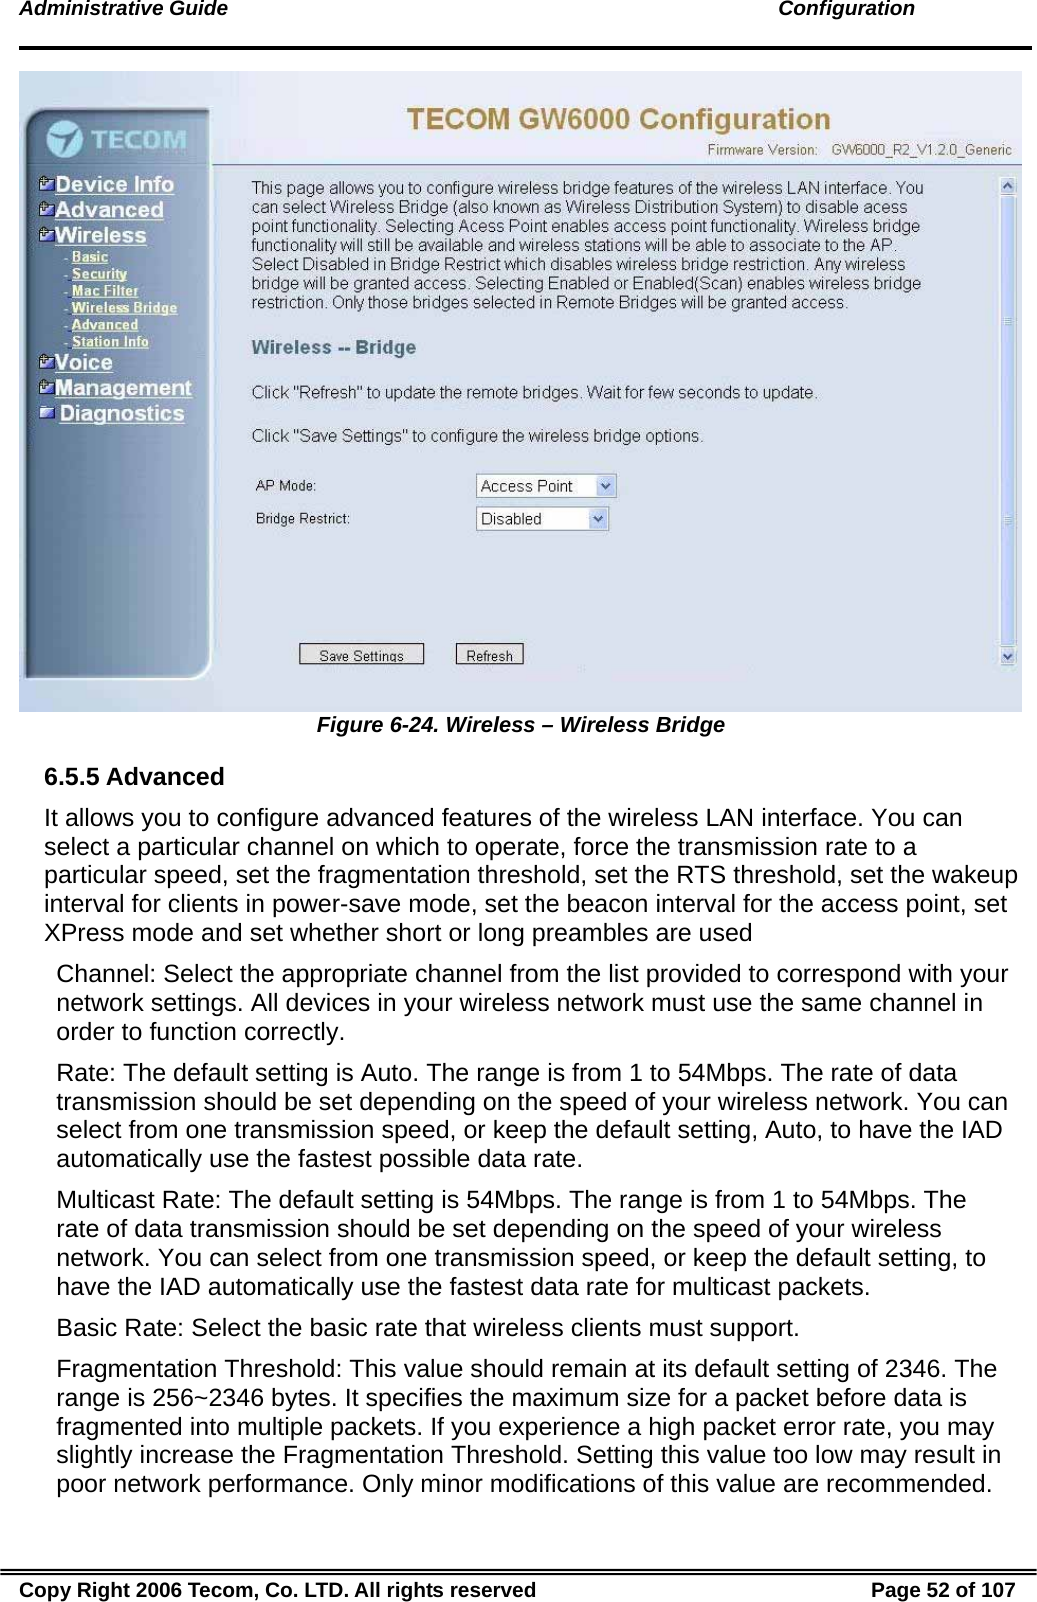 Administrative Guide                                                                                               Configuration  Figure 6-24. Wireless – Wireless Bridge 6.5.5 Advanced It allows you to configure advanced features of the wireless LAN interface. You can select a particular channel on which to operate, force the transmission rate to a particular speed, set the fragmentation threshold, set the RTS threshold, set the wakeup interval for clients in power-save mode, set the beacon interval for the access point, set XPress mode and set whether short or long preambles are used Channel: Select the appropriate channel from the list provided to correspond with your network settings. All devices in your wireless network must use the same channel in order to function correctly. Rate: The default setting is Auto. The range is from 1 to 54Mbps. The rate of data transmission should be set depending on the speed of your wireless network. You can select from one transmission speed, or keep the default setting, Auto, to have the IAD automatically use the fastest possible data rate. Multicast Rate: The default setting is 54Mbps. The range is from 1 to 54Mbps. The rate of data transmission should be set depending on the speed of your wireless network. You can select from one transmission speed, or keep the default setting, to have the IAD automatically use the fastest data rate for multicast packets. Basic Rate: Select the basic rate that wireless clients must support. Fragmentation Threshold: This value should remain at its default setting of 2346. The range is 256~2346 bytes. It specifies the maximum size for a packet before data is fragmented into multiple packets. If you experience a high packet error rate, you may slightly increase the Fragmentation Threshold. Setting this value too low may result in poor network performance. Only minor modifications of this value are recommended. Copy Right 2006 Tecom, Co. LTD. All rights reserved  Page 52 of 107 